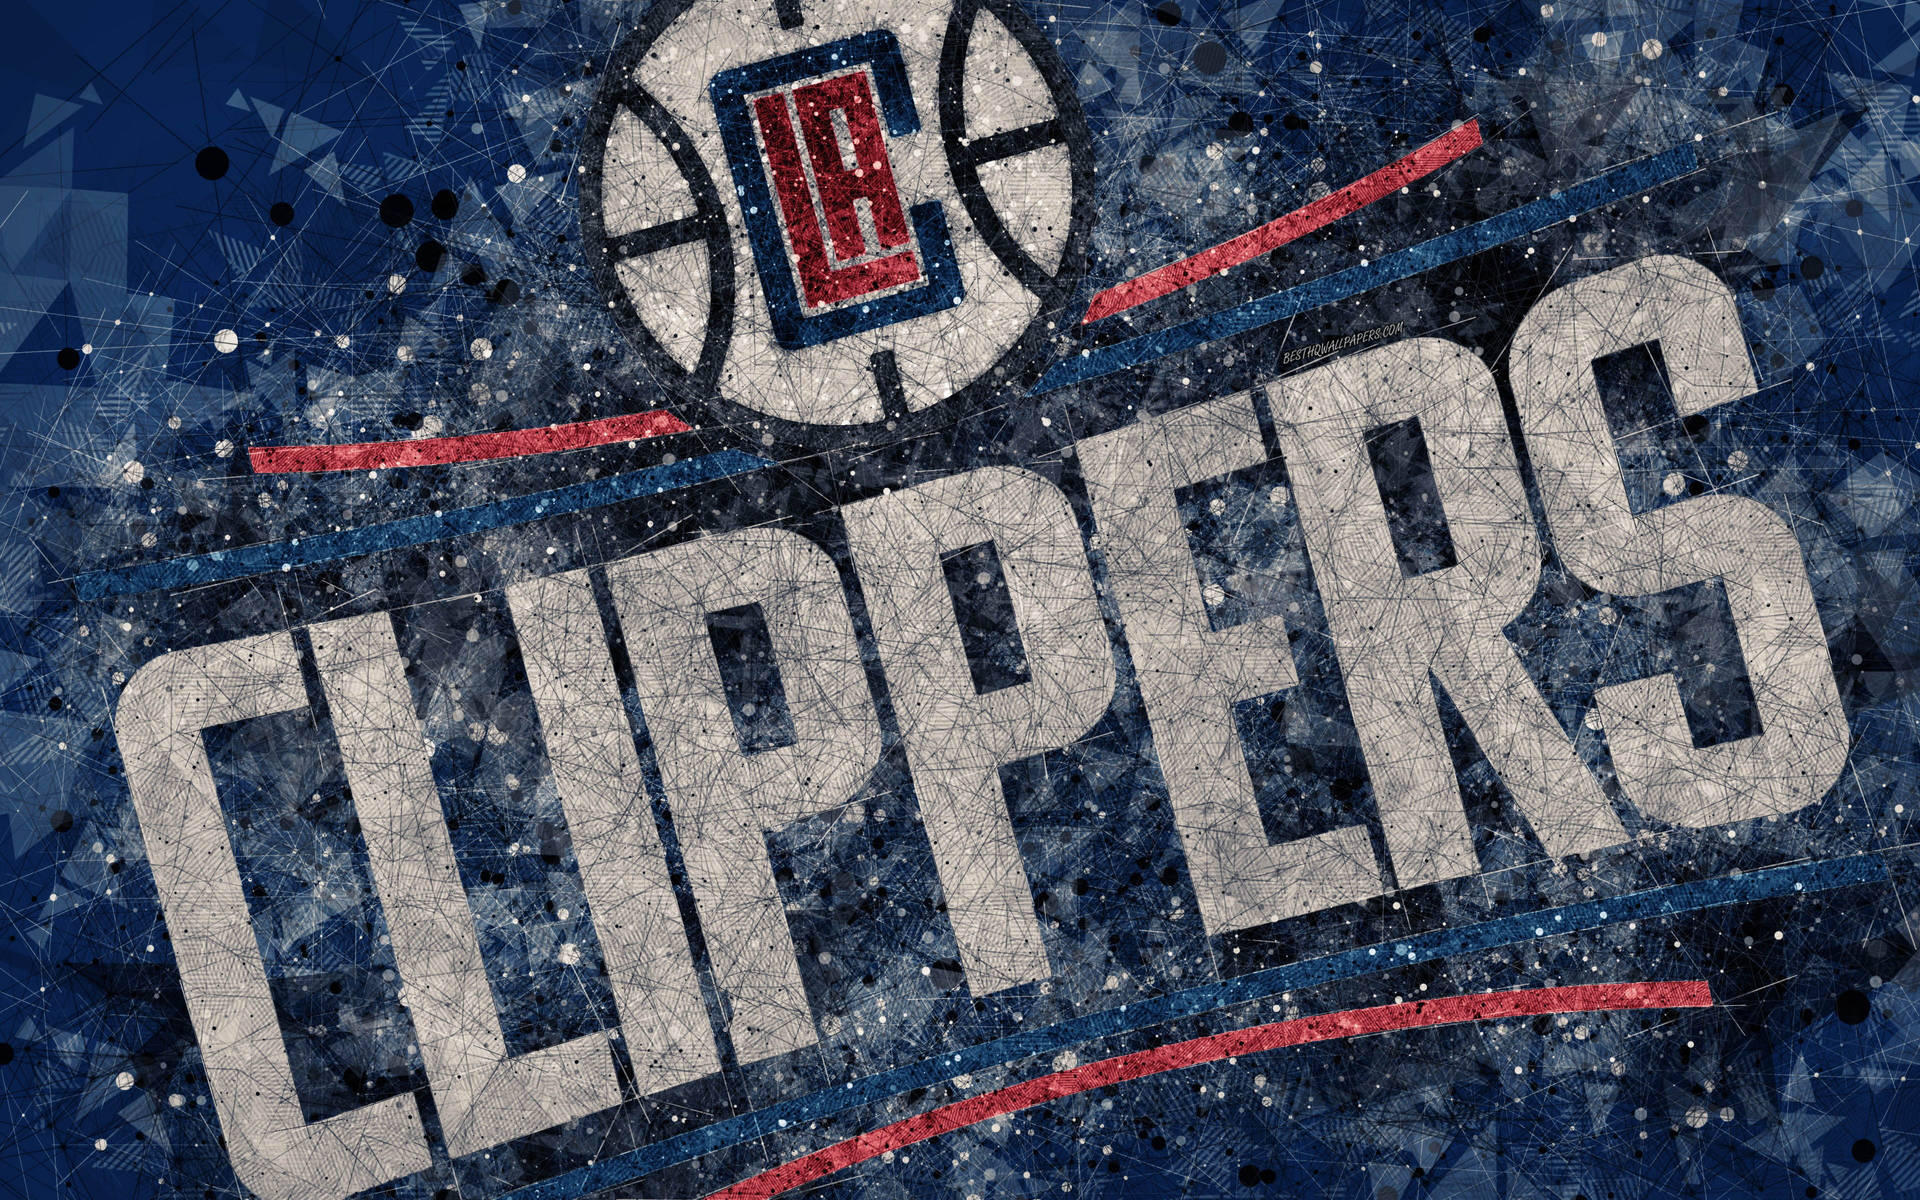 Los Angeles Clippers Geometric Artwork